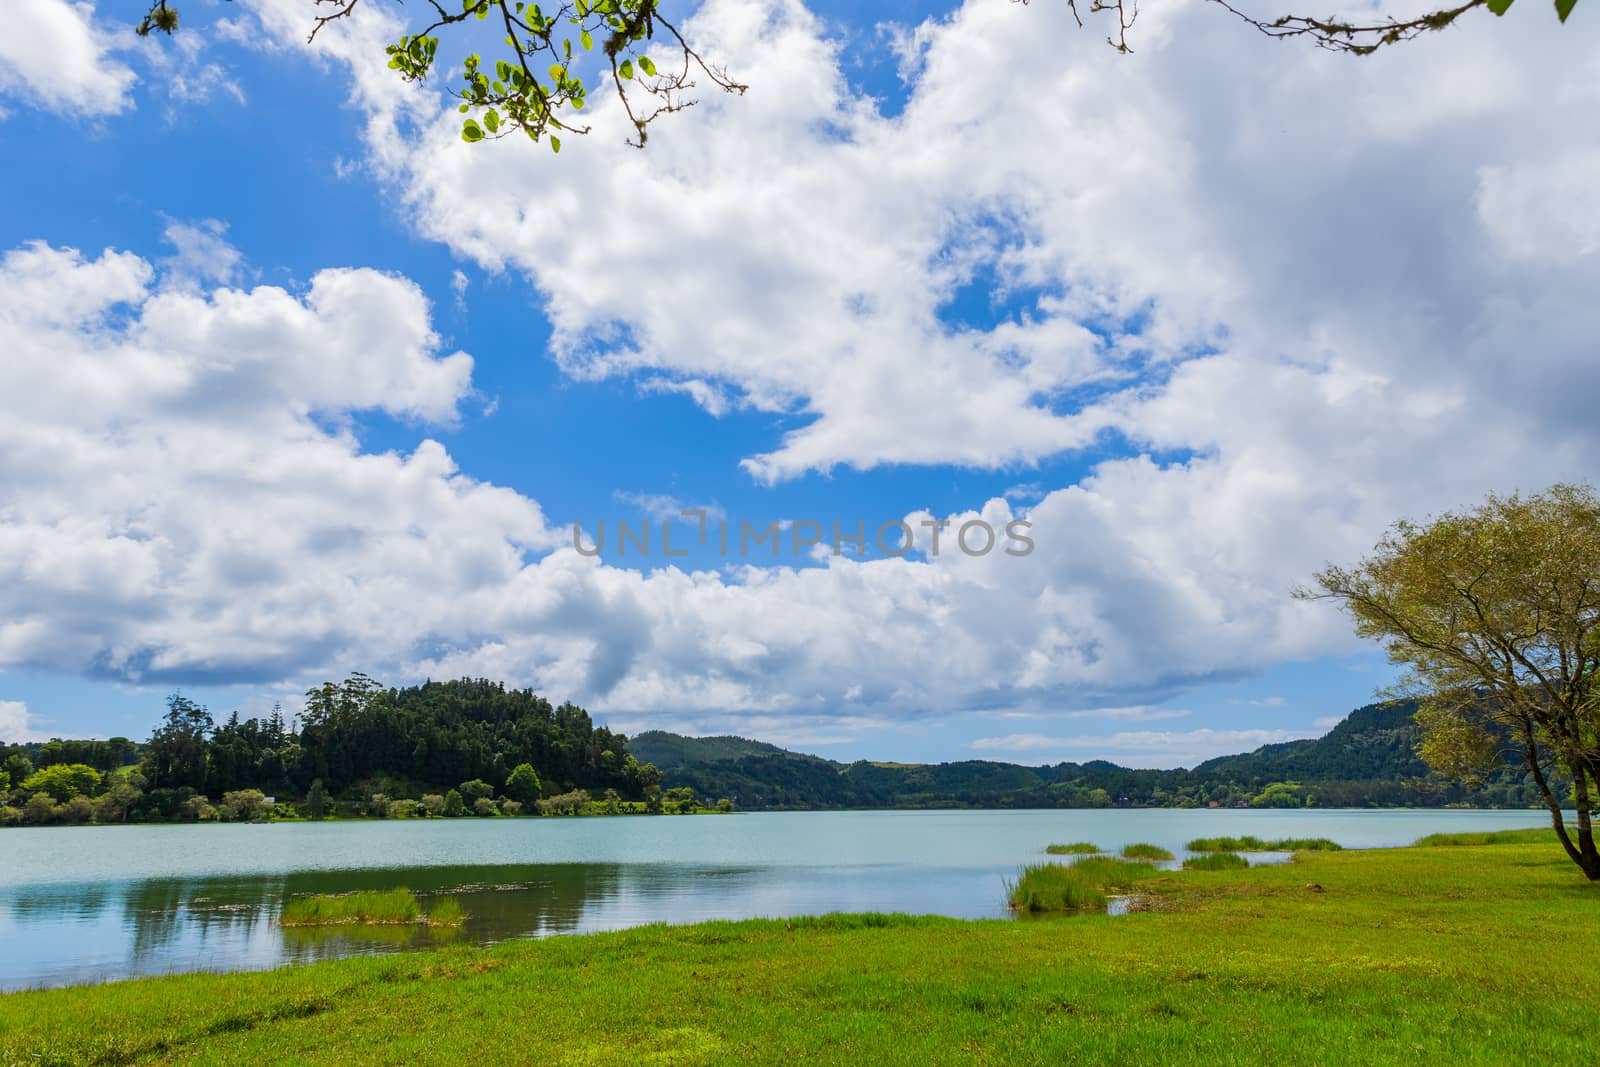 Scenic view of Furnas lake in Sao Miguel island, Azores, Portugal. An enchanting and tranquil scene of lush foliage and the lake in a volcanic crater